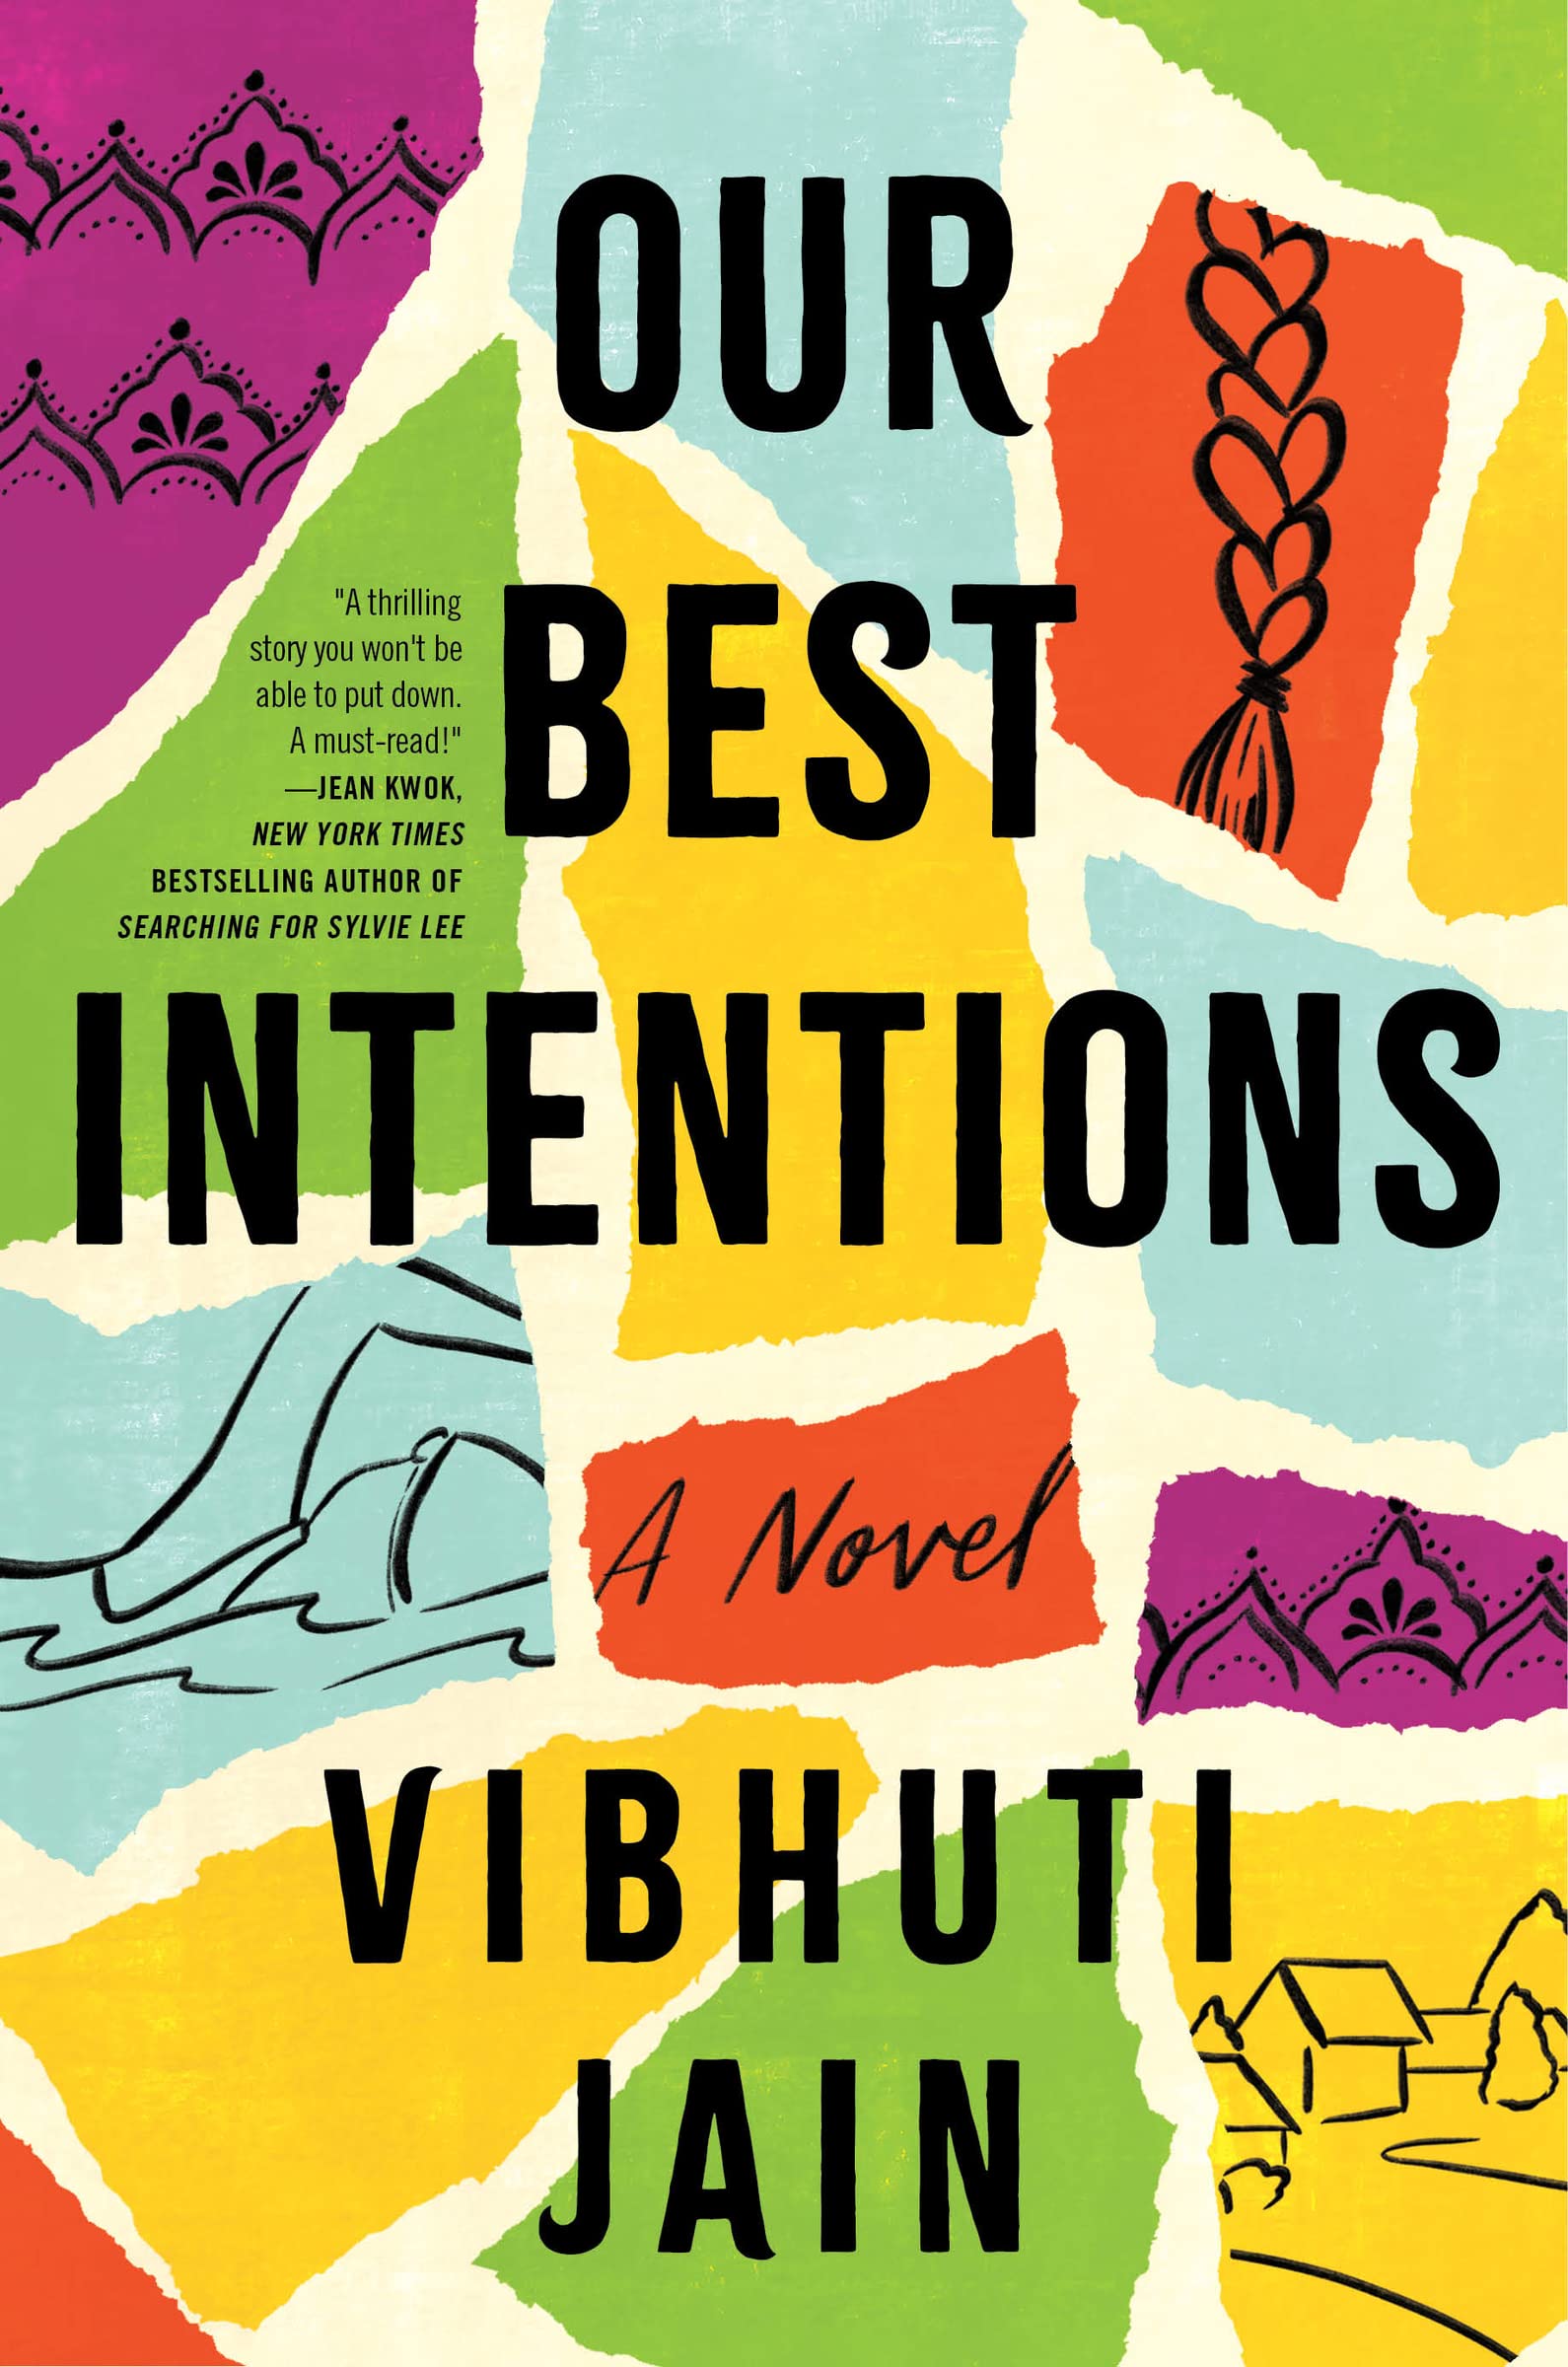 Image for "Our Best Intentions"